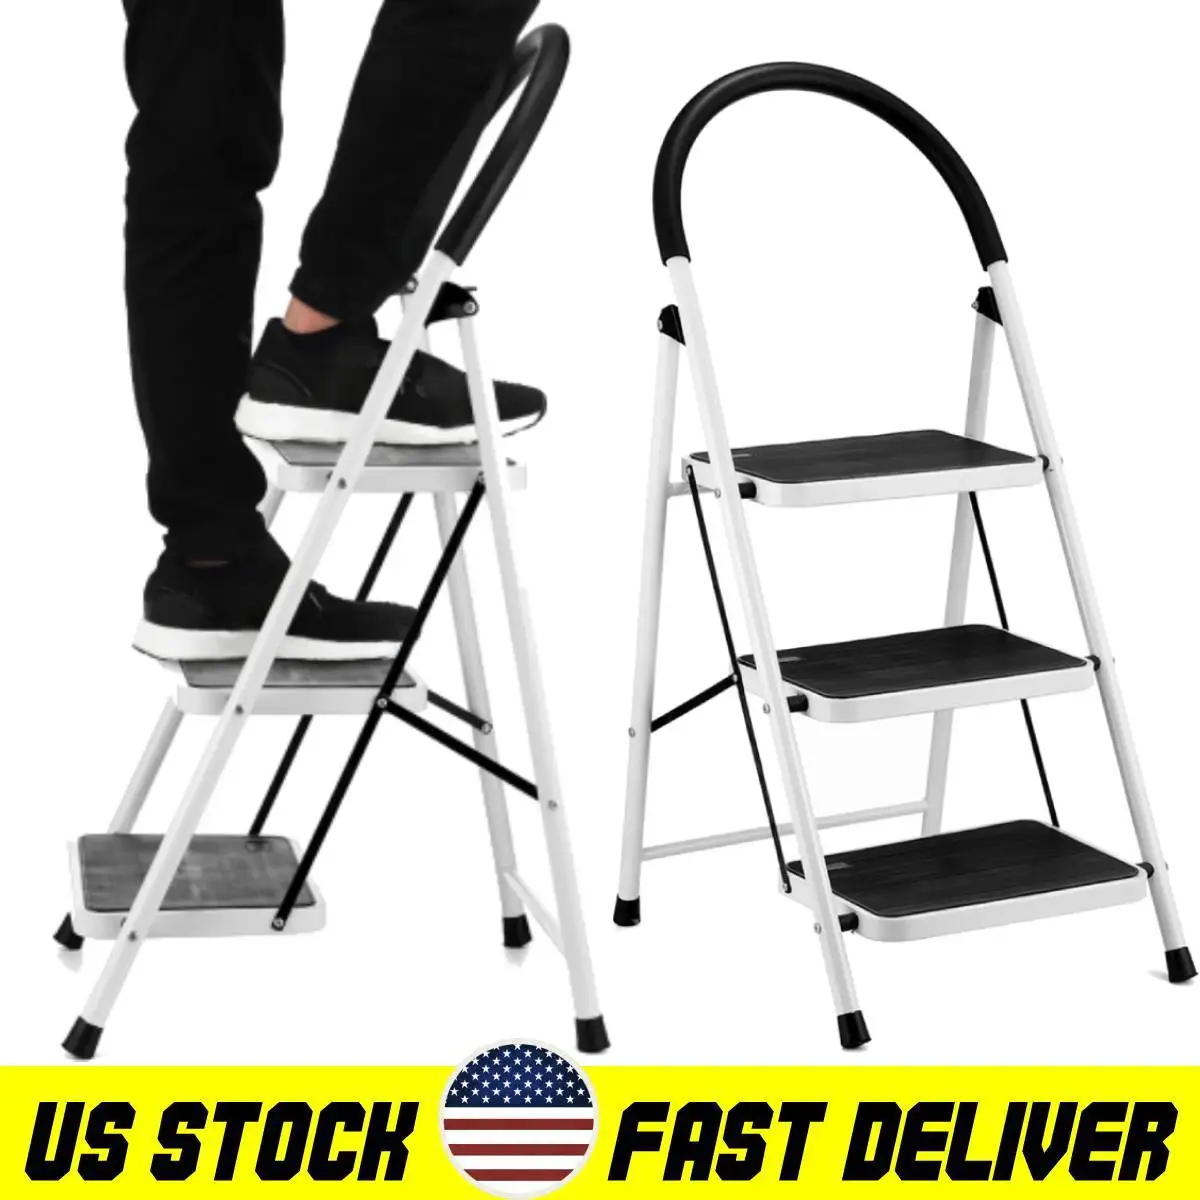 Home 3 Step Ladder Folding Step Stool with Rubber Handgrip Wide Anti-Slip Pedal Sturdy Steel Ladder for Household Kitchen US